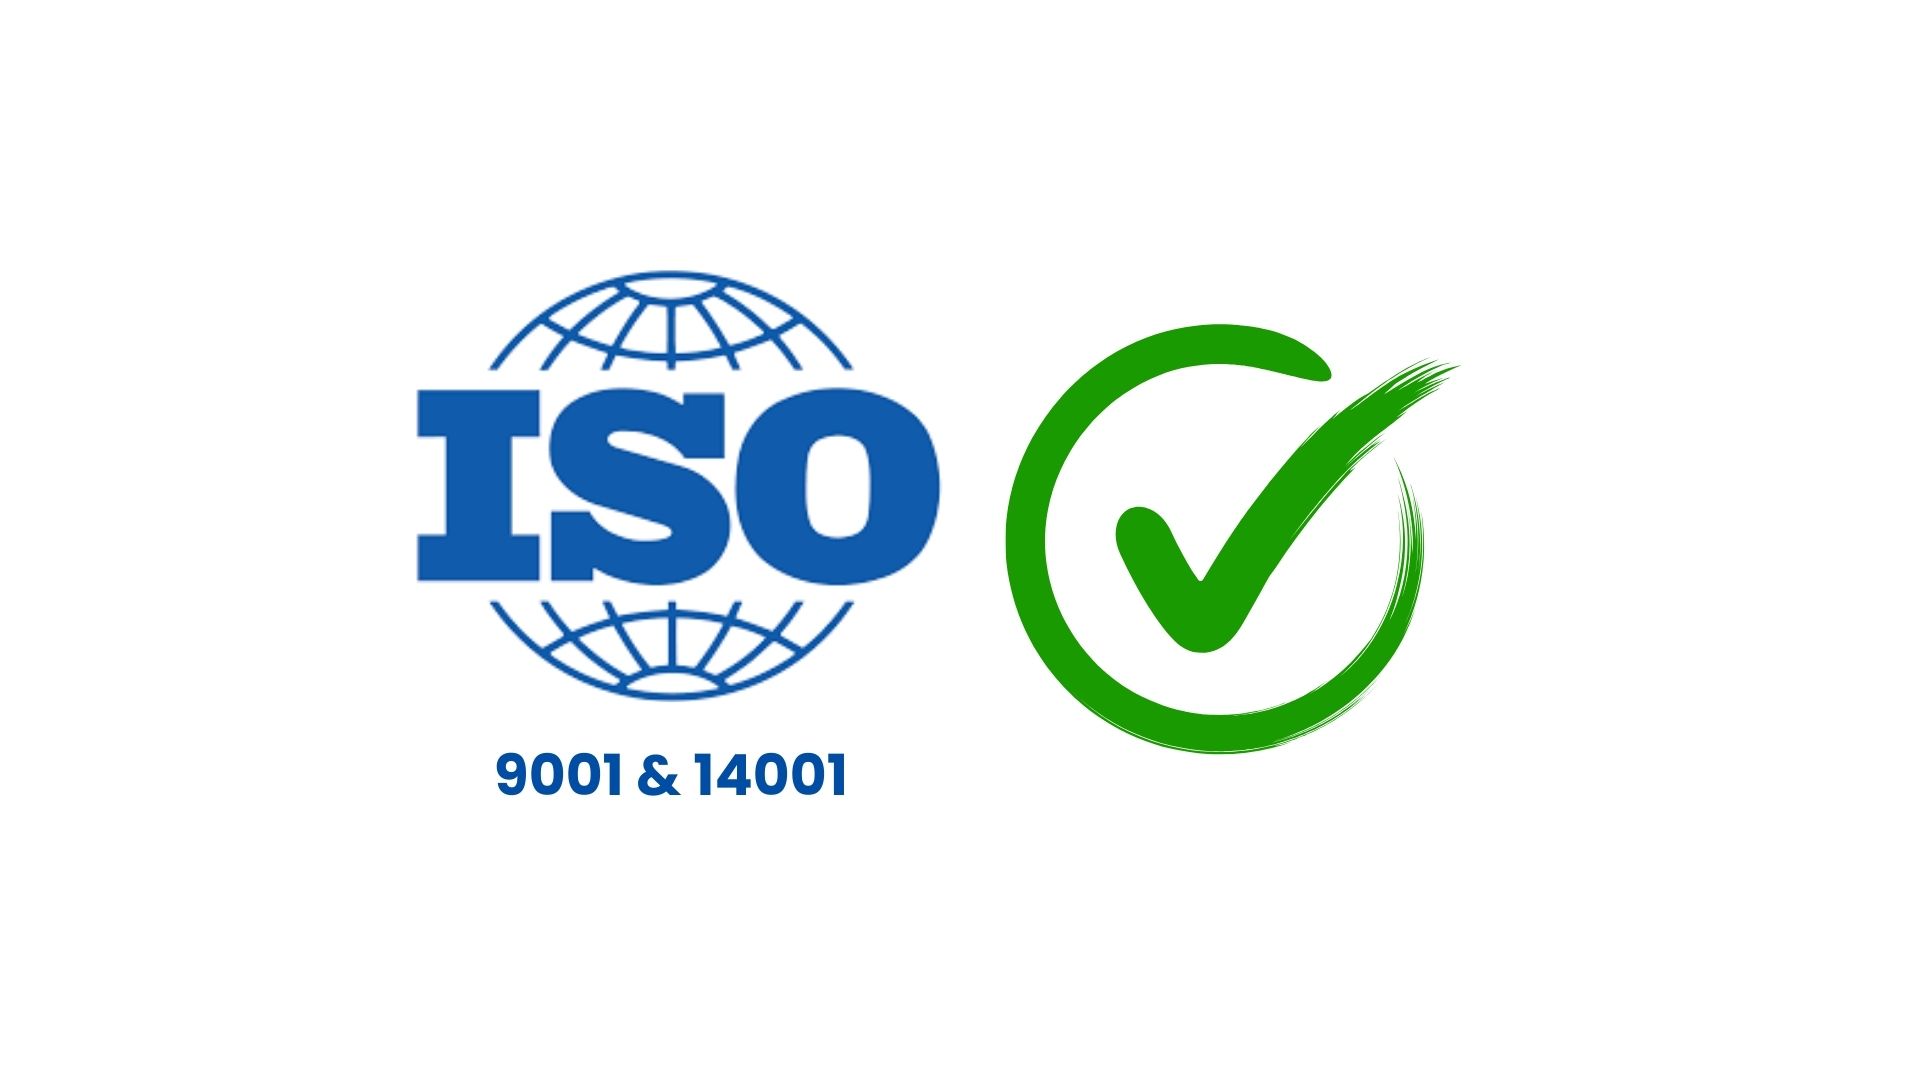 Vinci Response Secures ISO 9001 and 14001 Accreditations